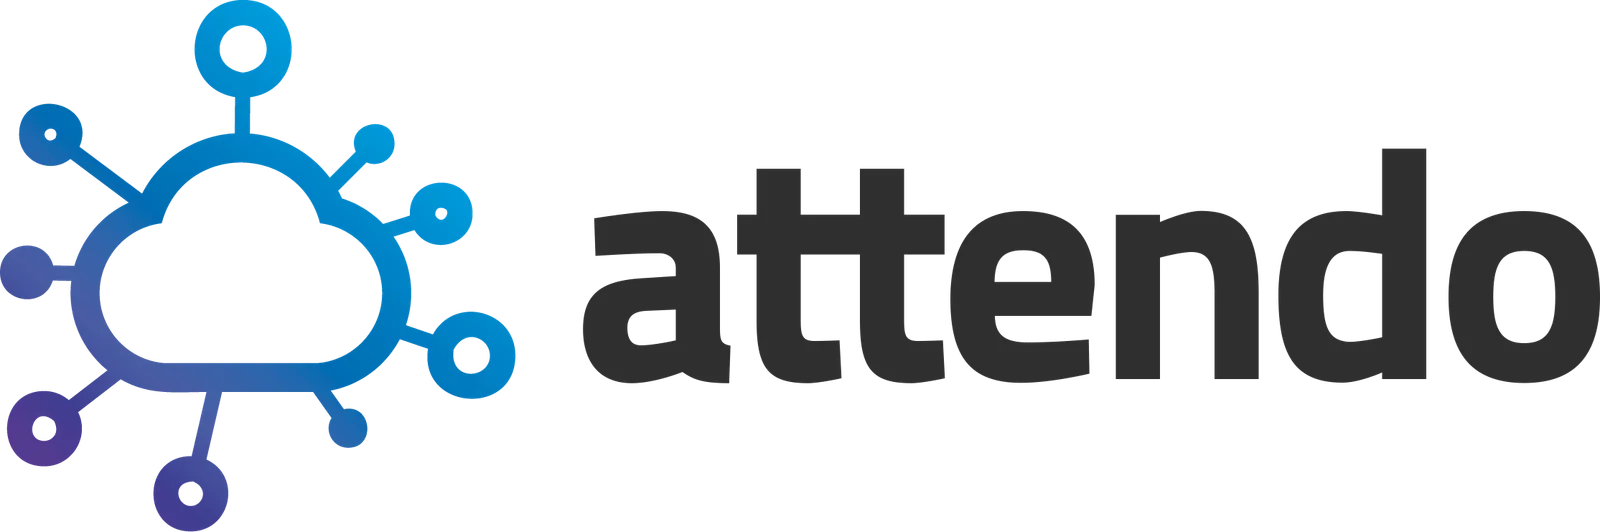 attendo-logo.png